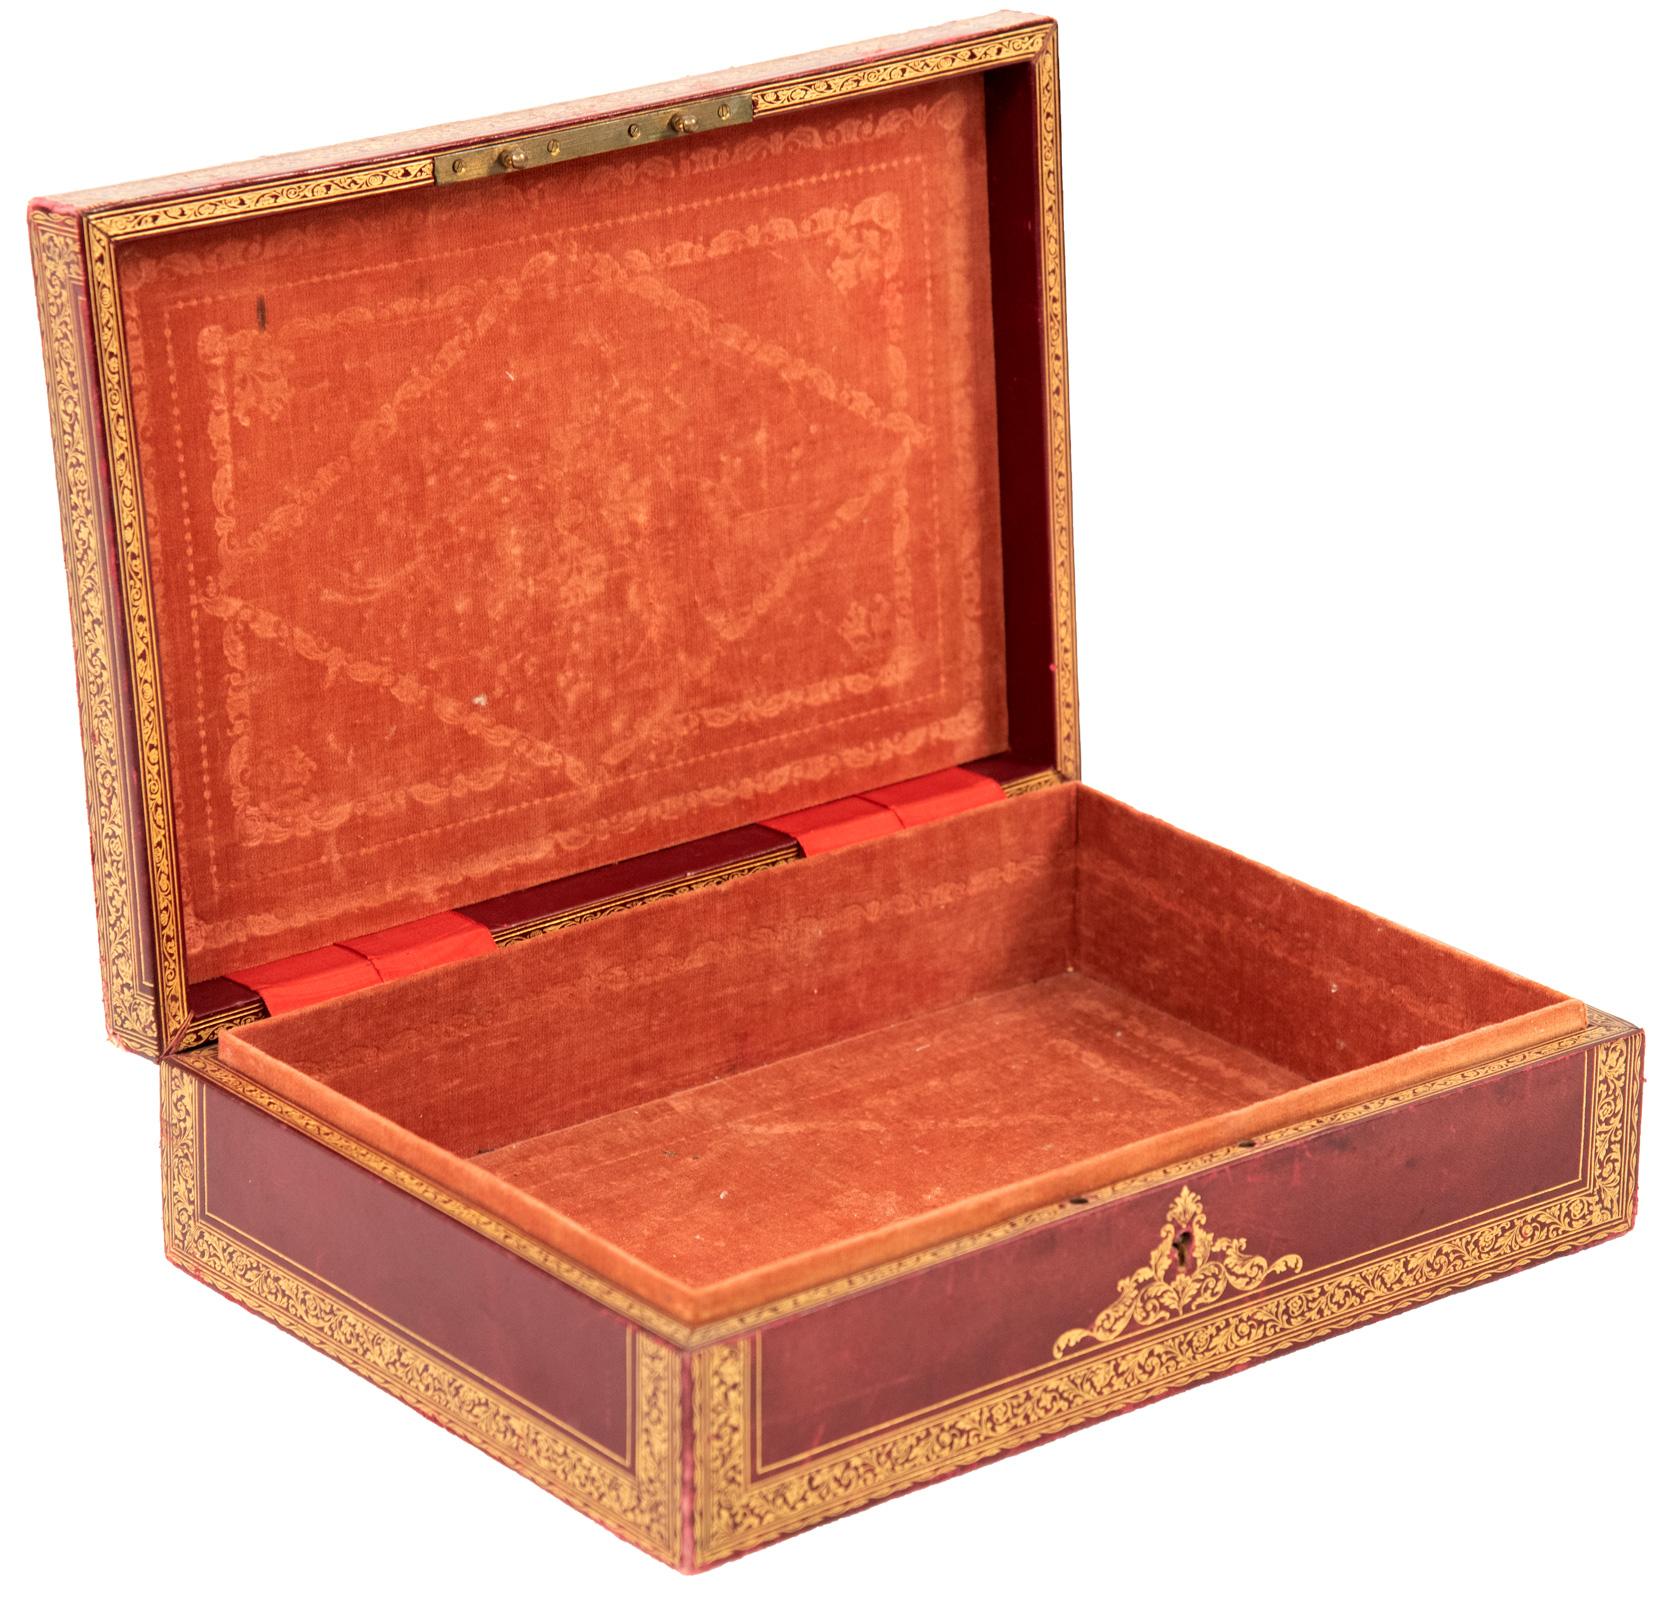 19th Century Italian Stamped and Gilt Red Leather Box with Suede Interior For Sale 1